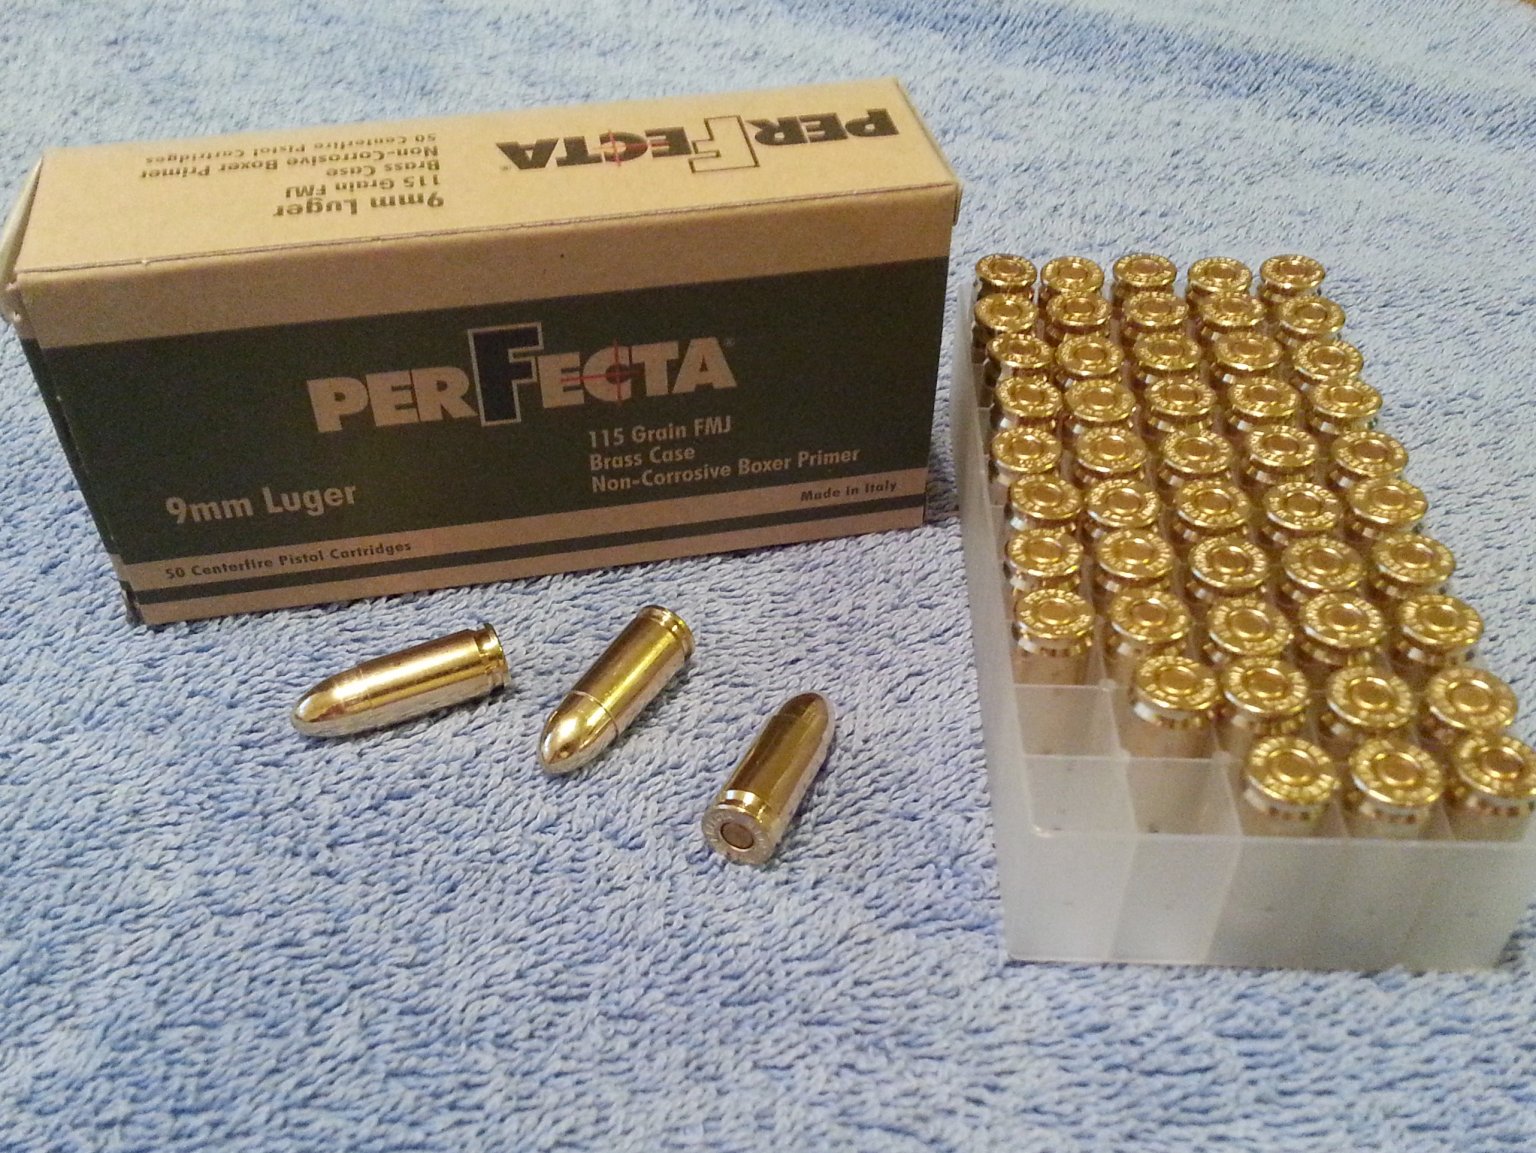 Grain rounds. 9 Мм Luger - FMJ - SB. 9 Mm Luger гильза. 9mm m882 FMJ Ammo. 9mm Luger гильза CD.